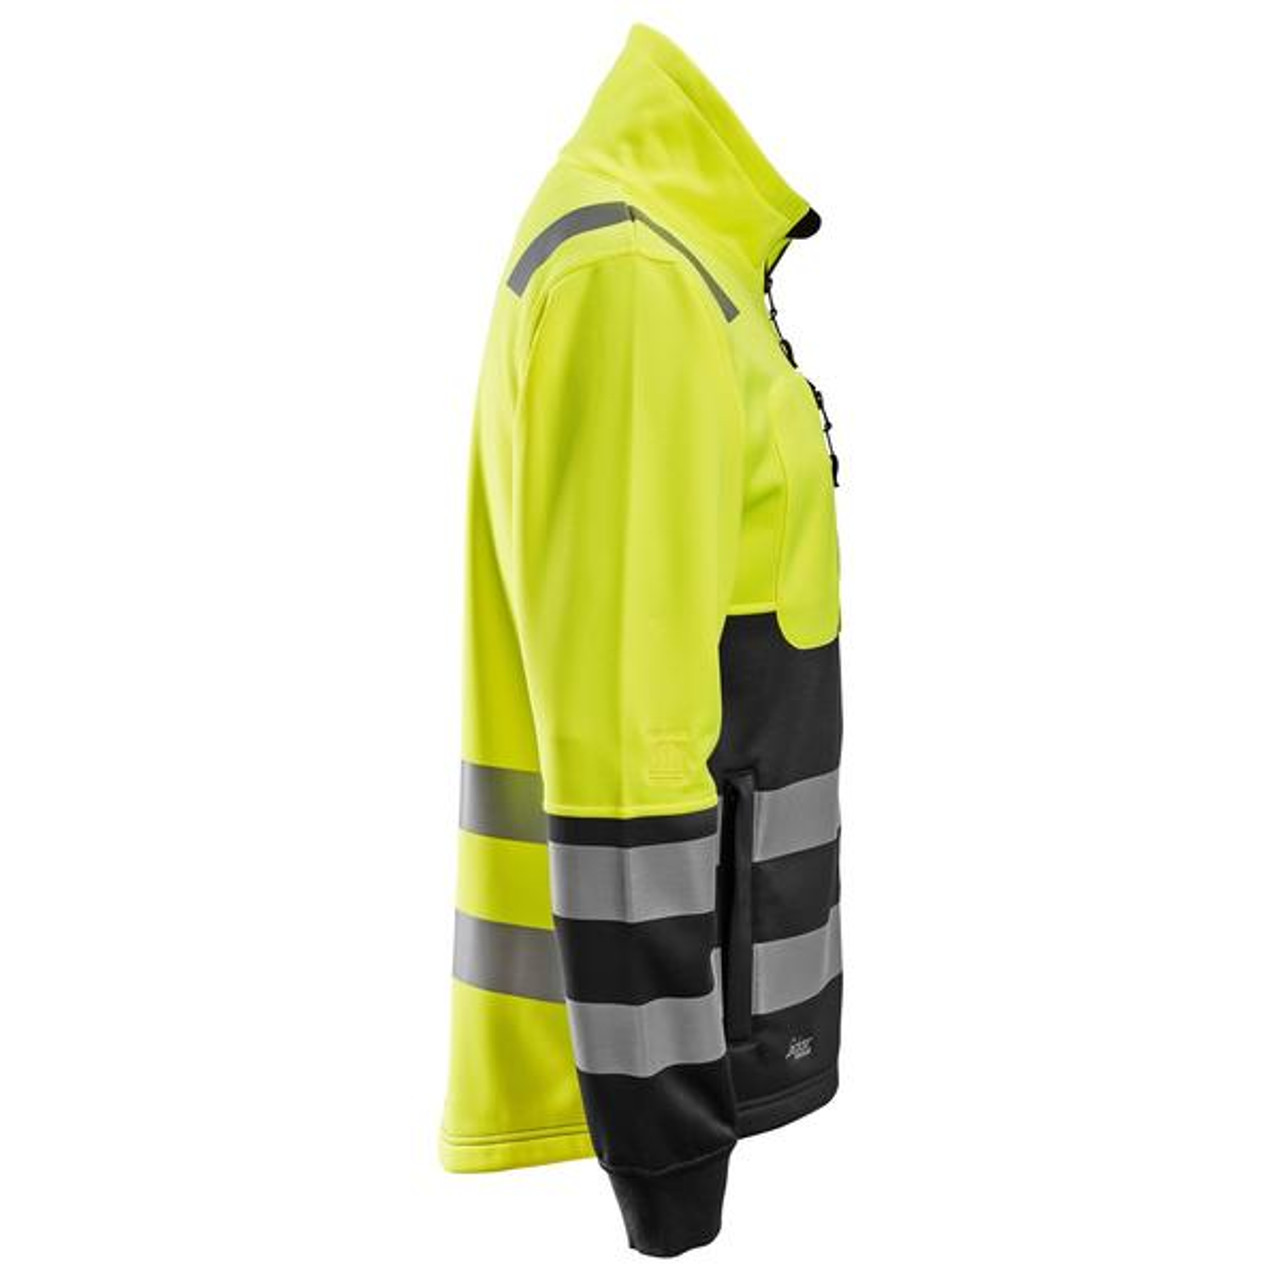 Buy online in Australia and New Zealand a  High Vis Yellow Pullover  for Electricians that are comfortable and durable.